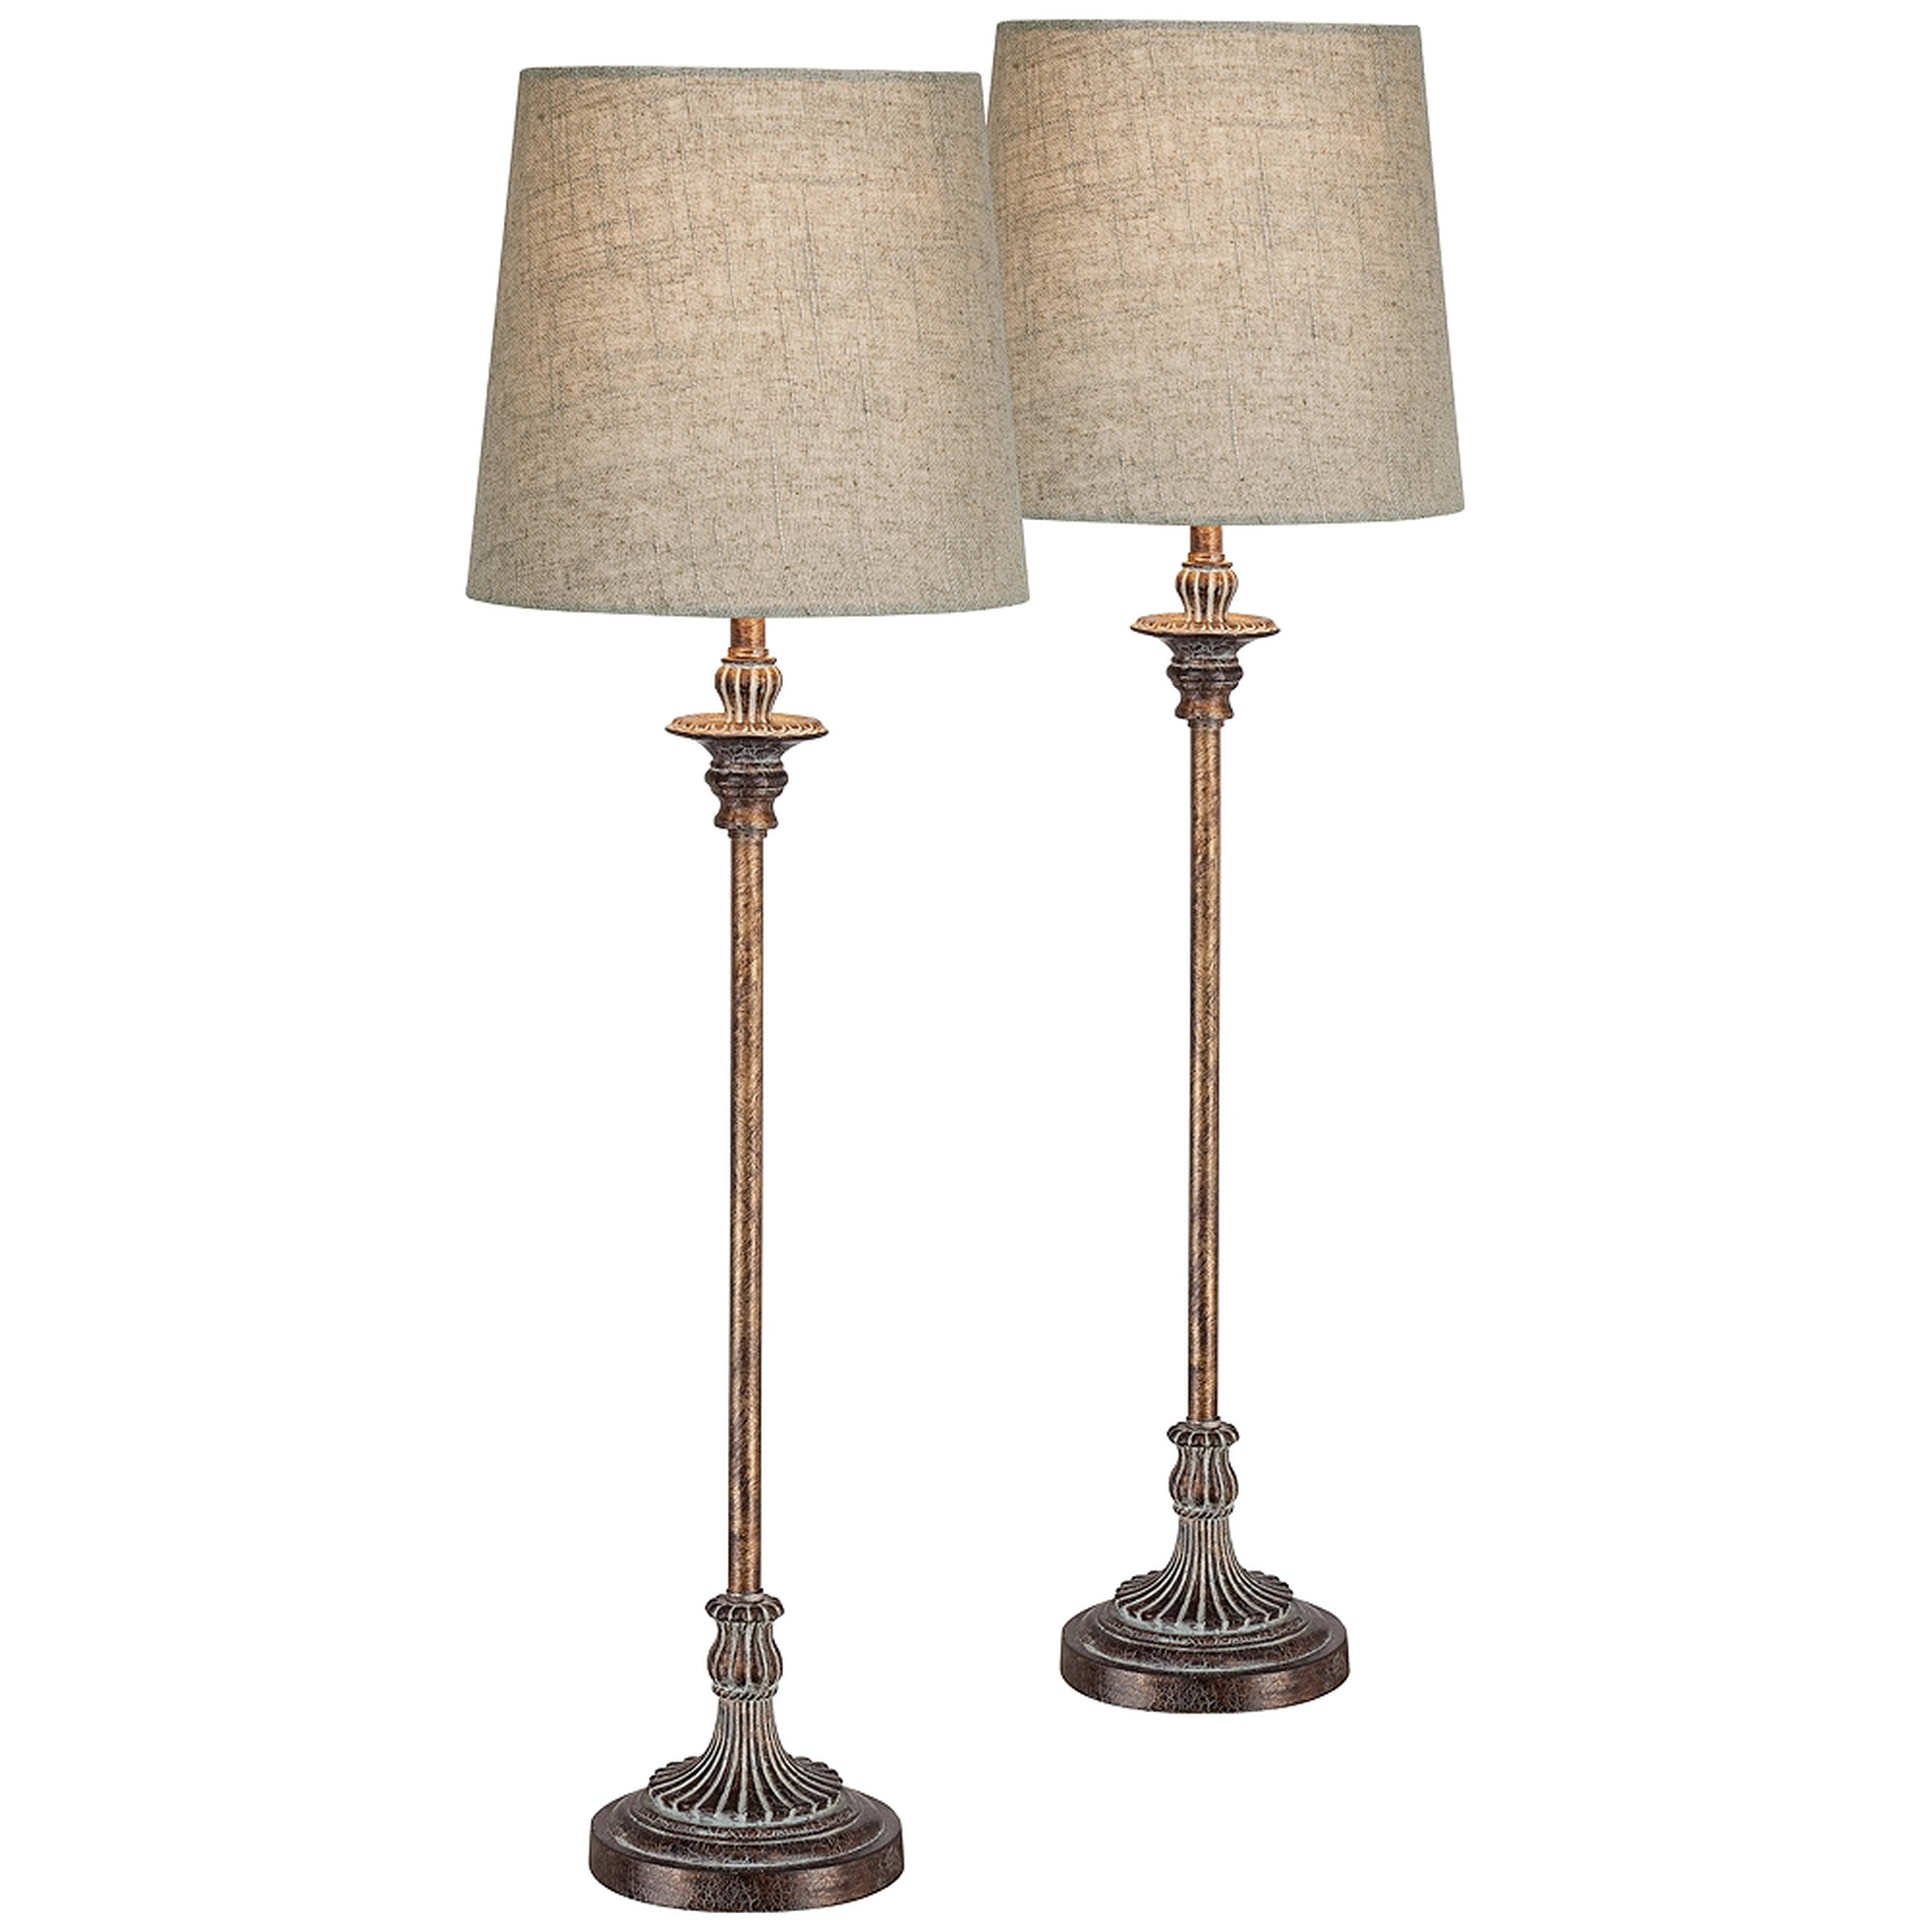 Bentley Weathered Brown Buffet Table Lamp Set of 2 - Style # 17P69 - Lamps Plus